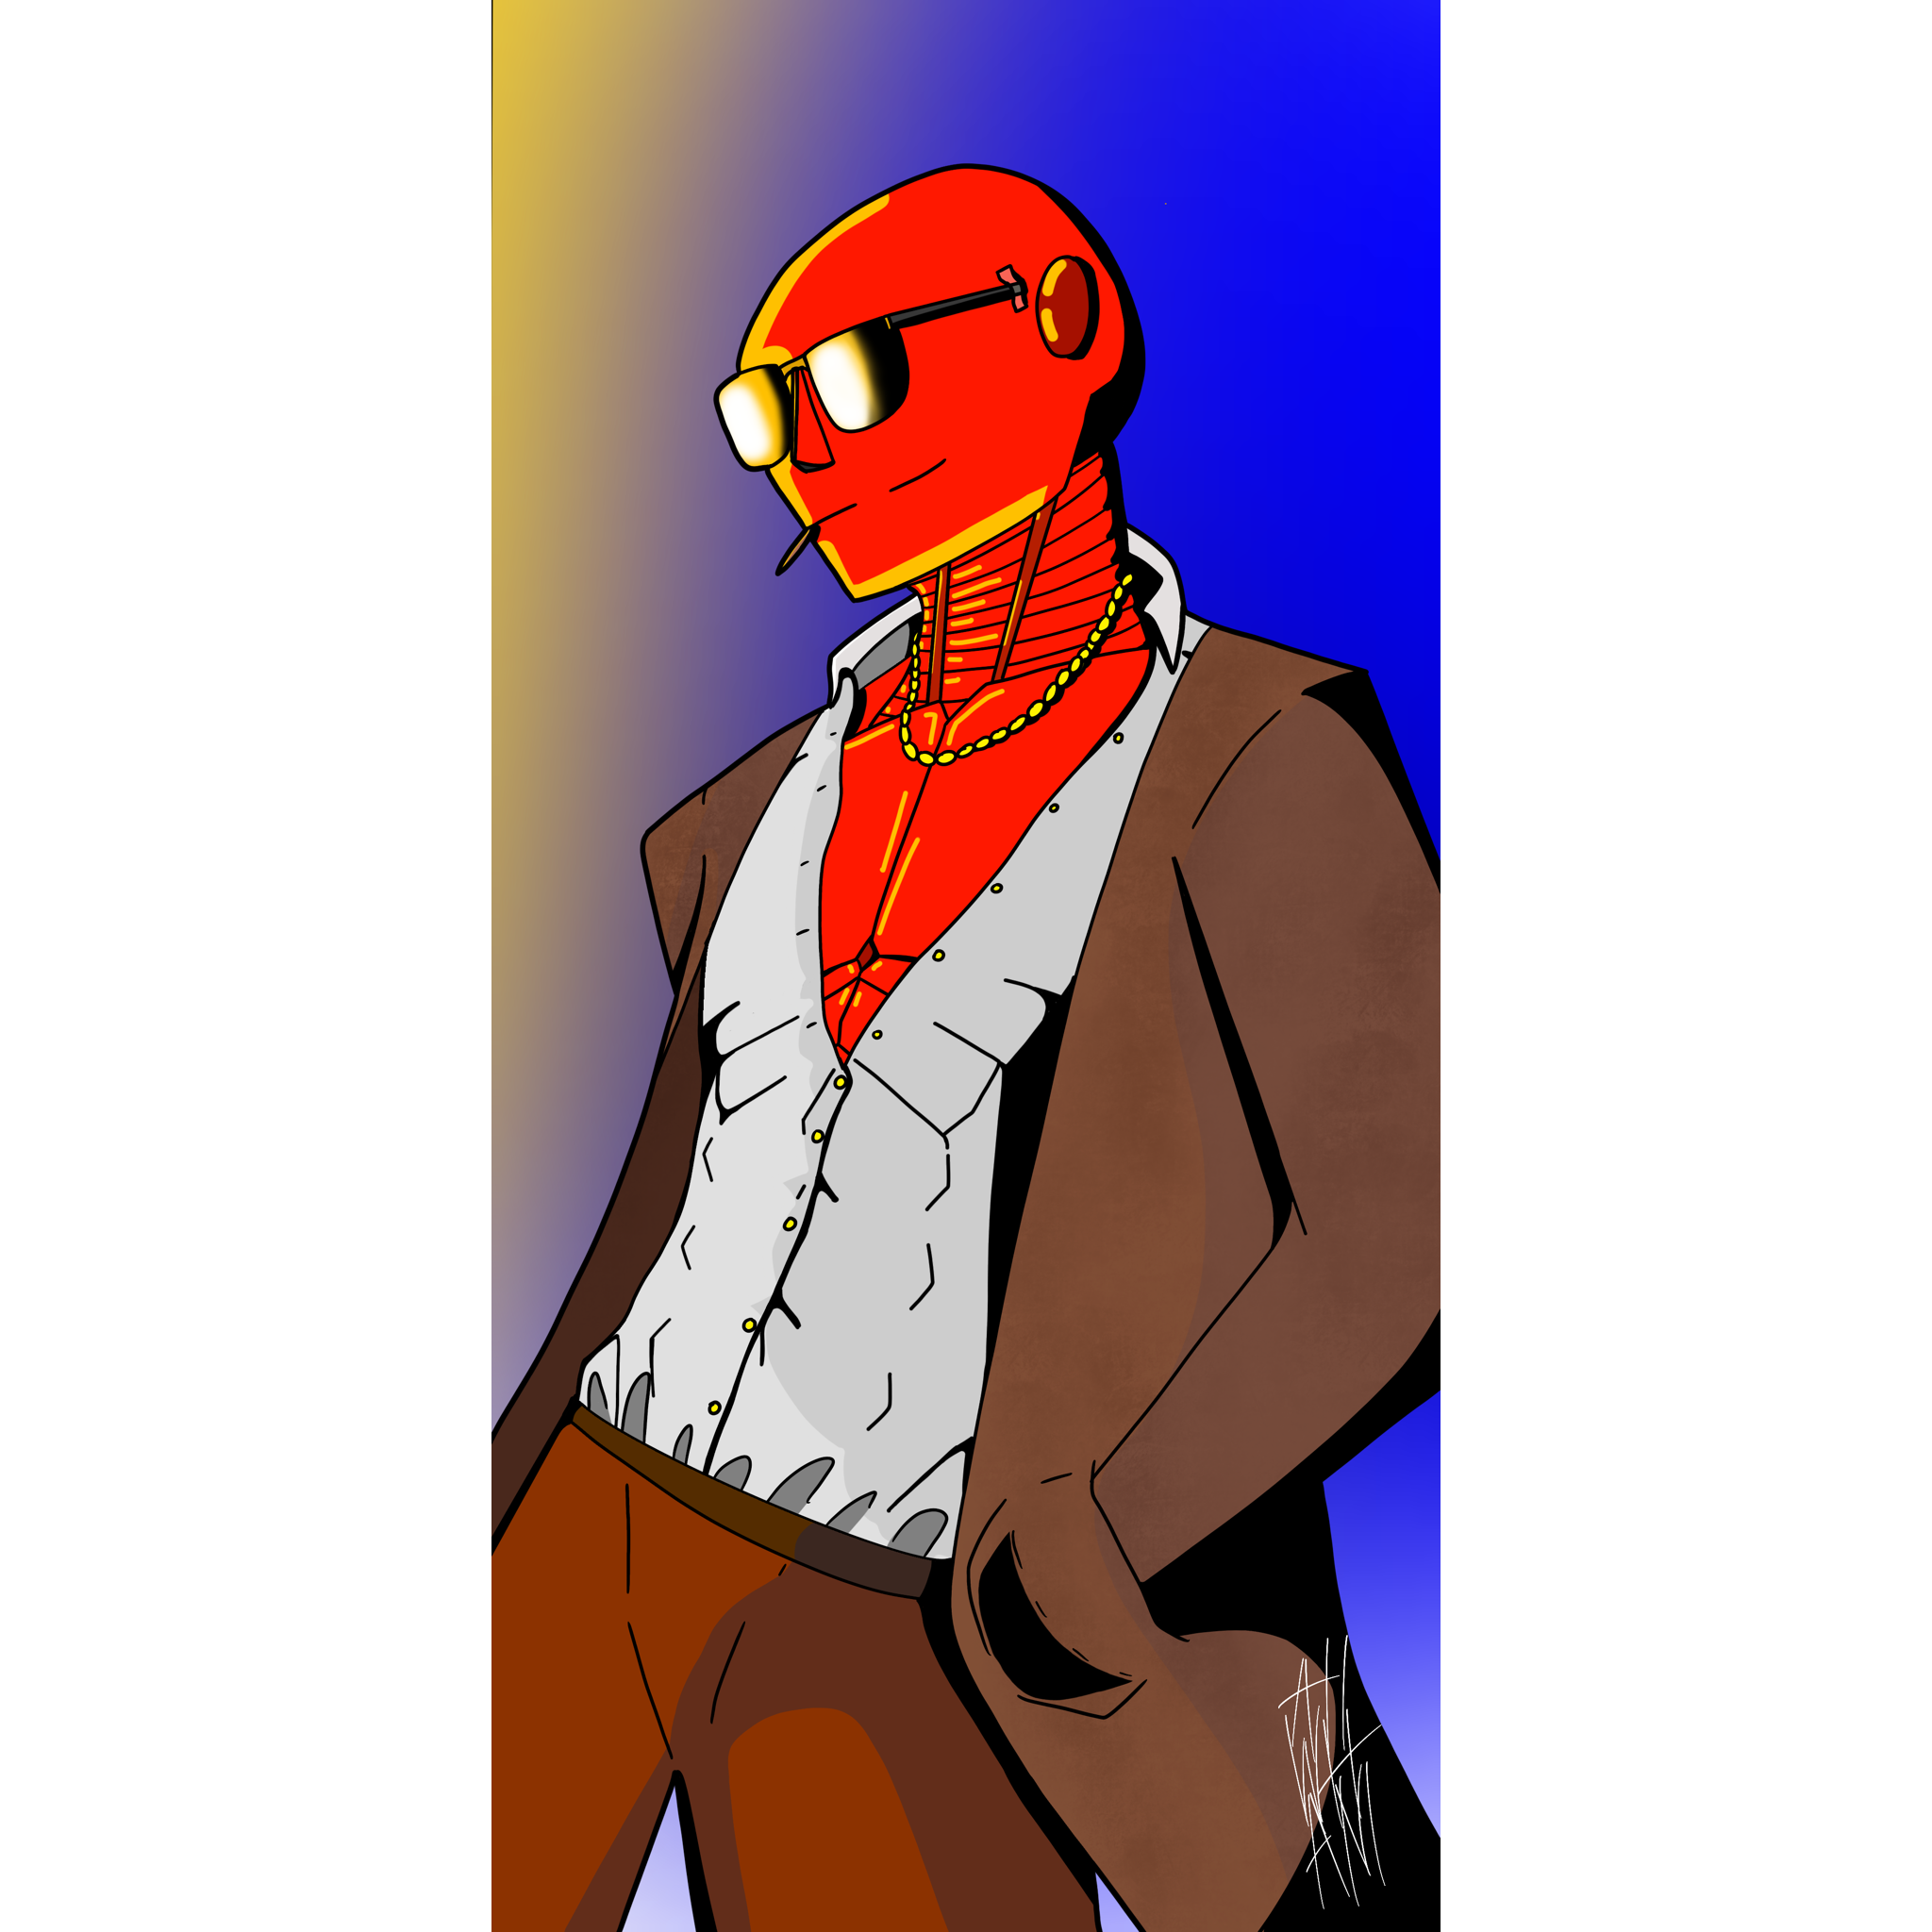 Cyborg named Crimson with sunglasses and fancy clothes.